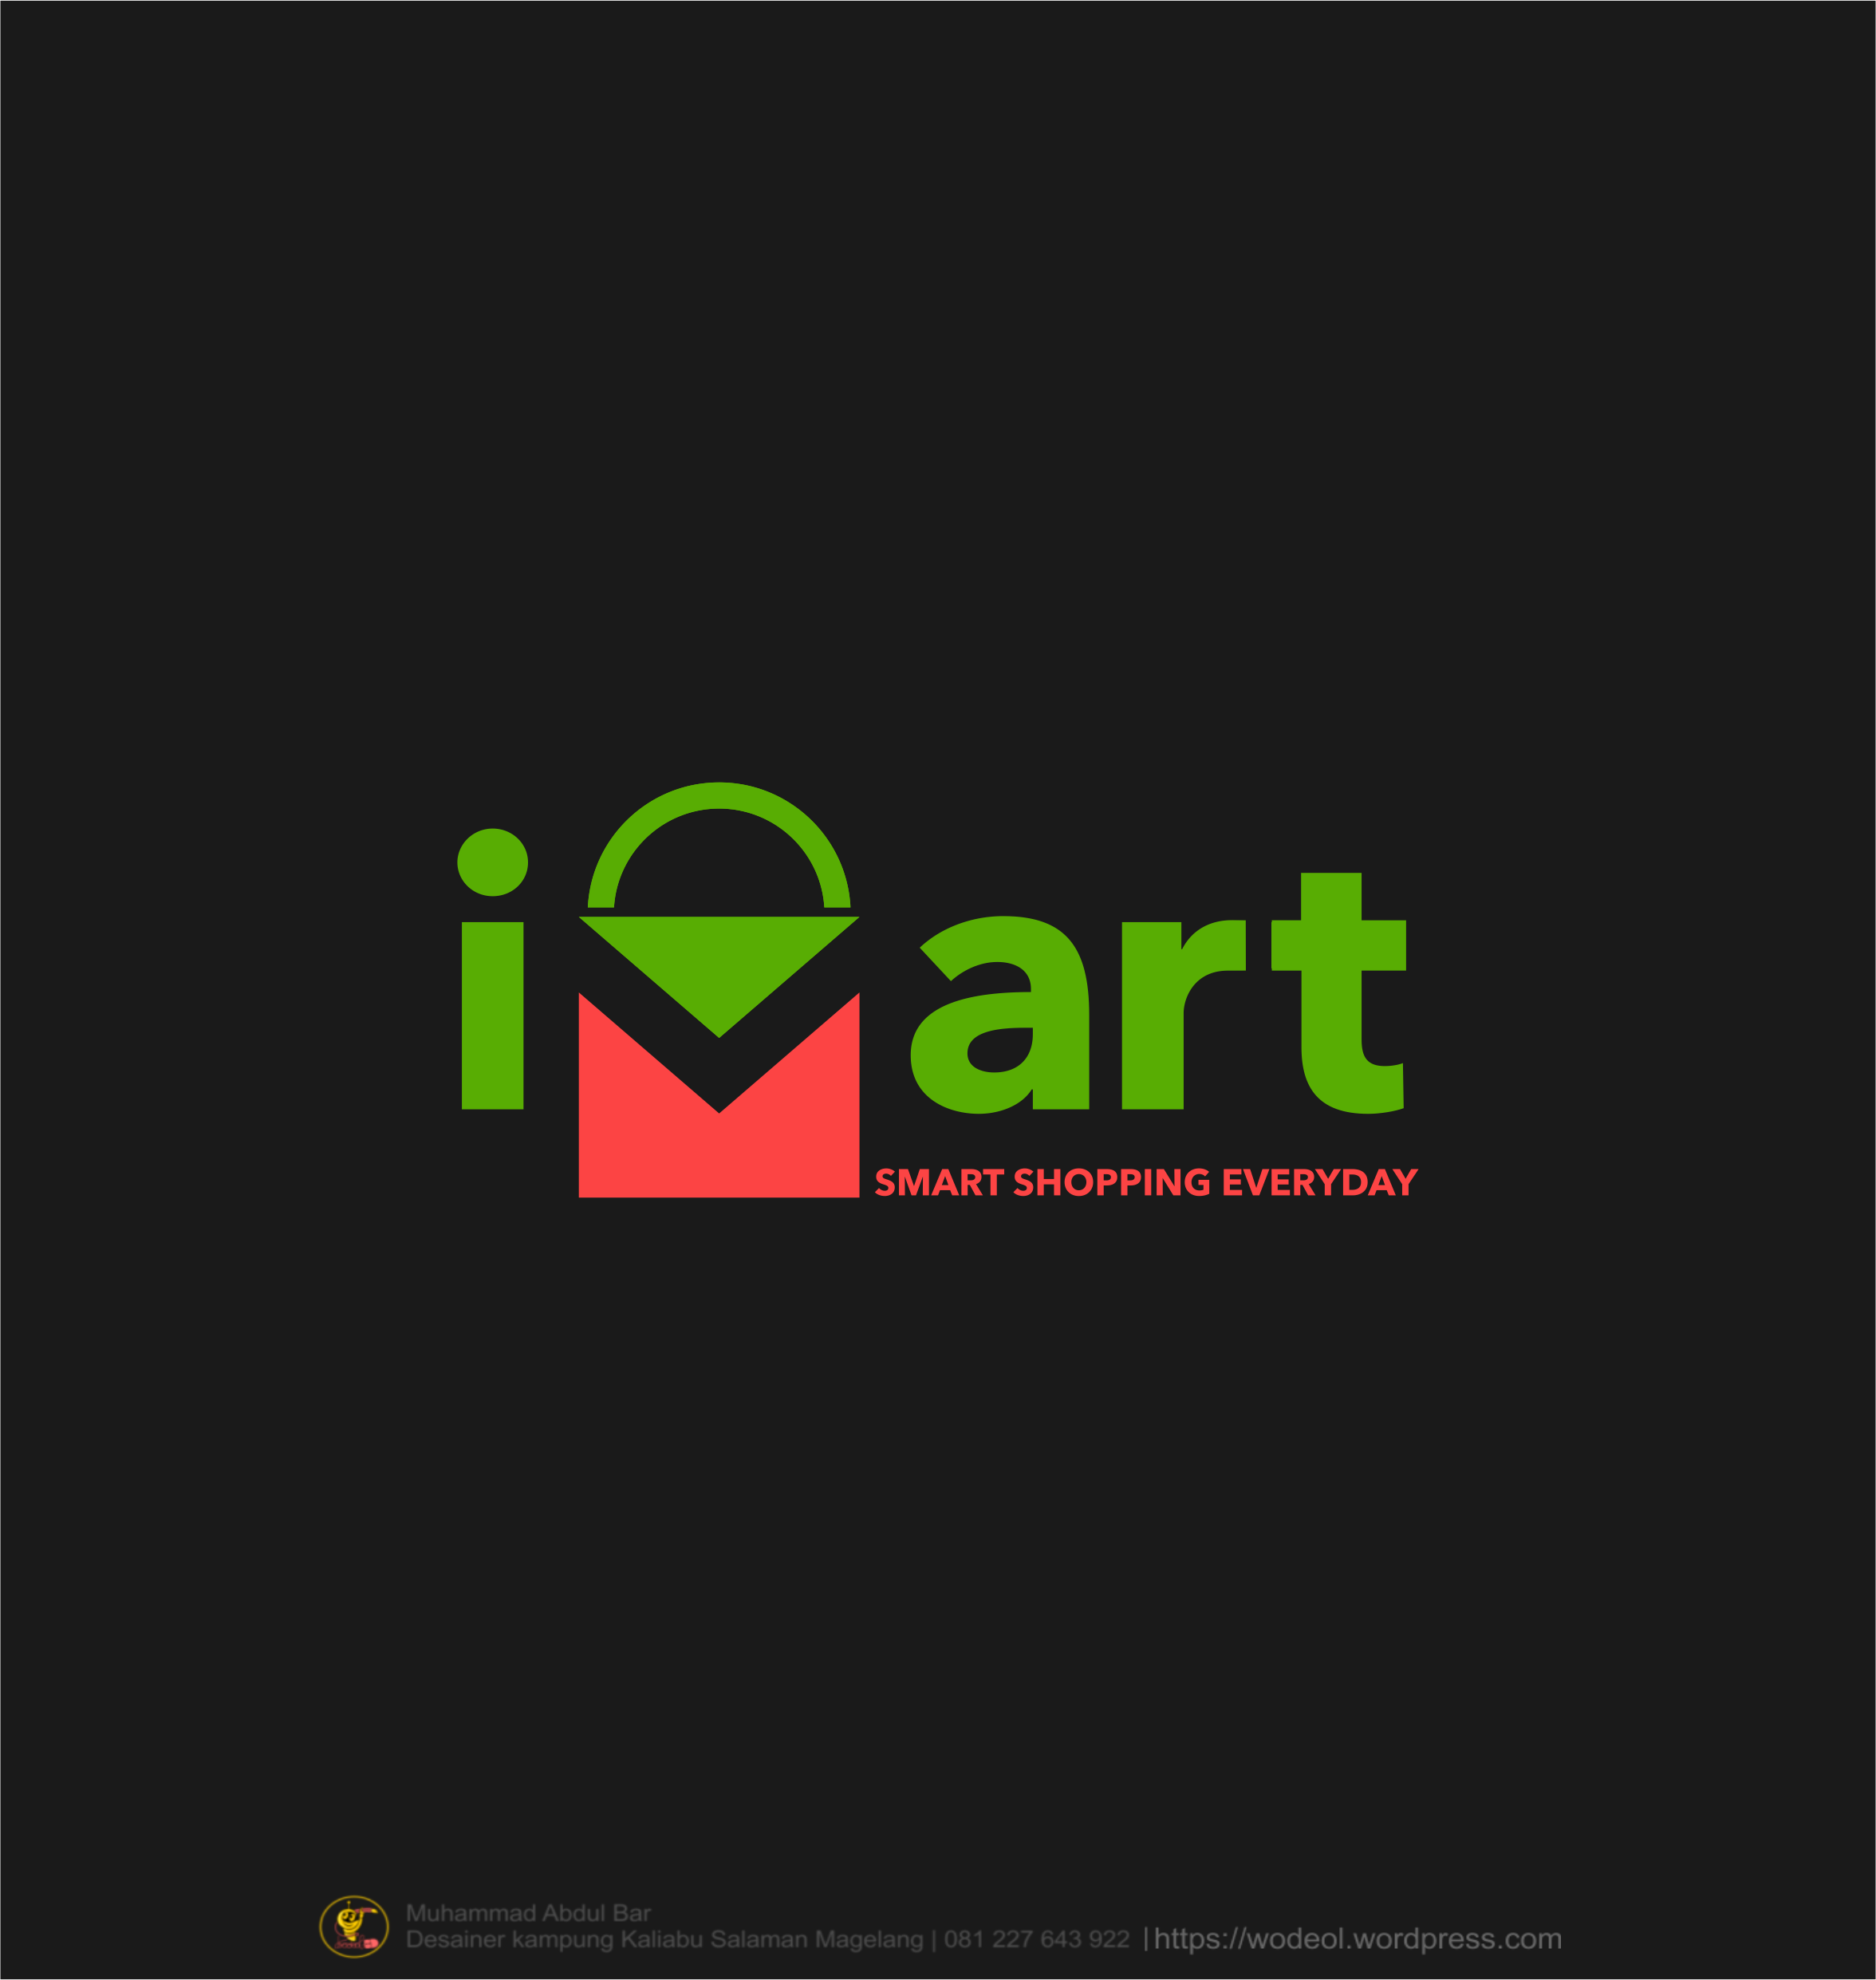 IMART____. My every day shopping